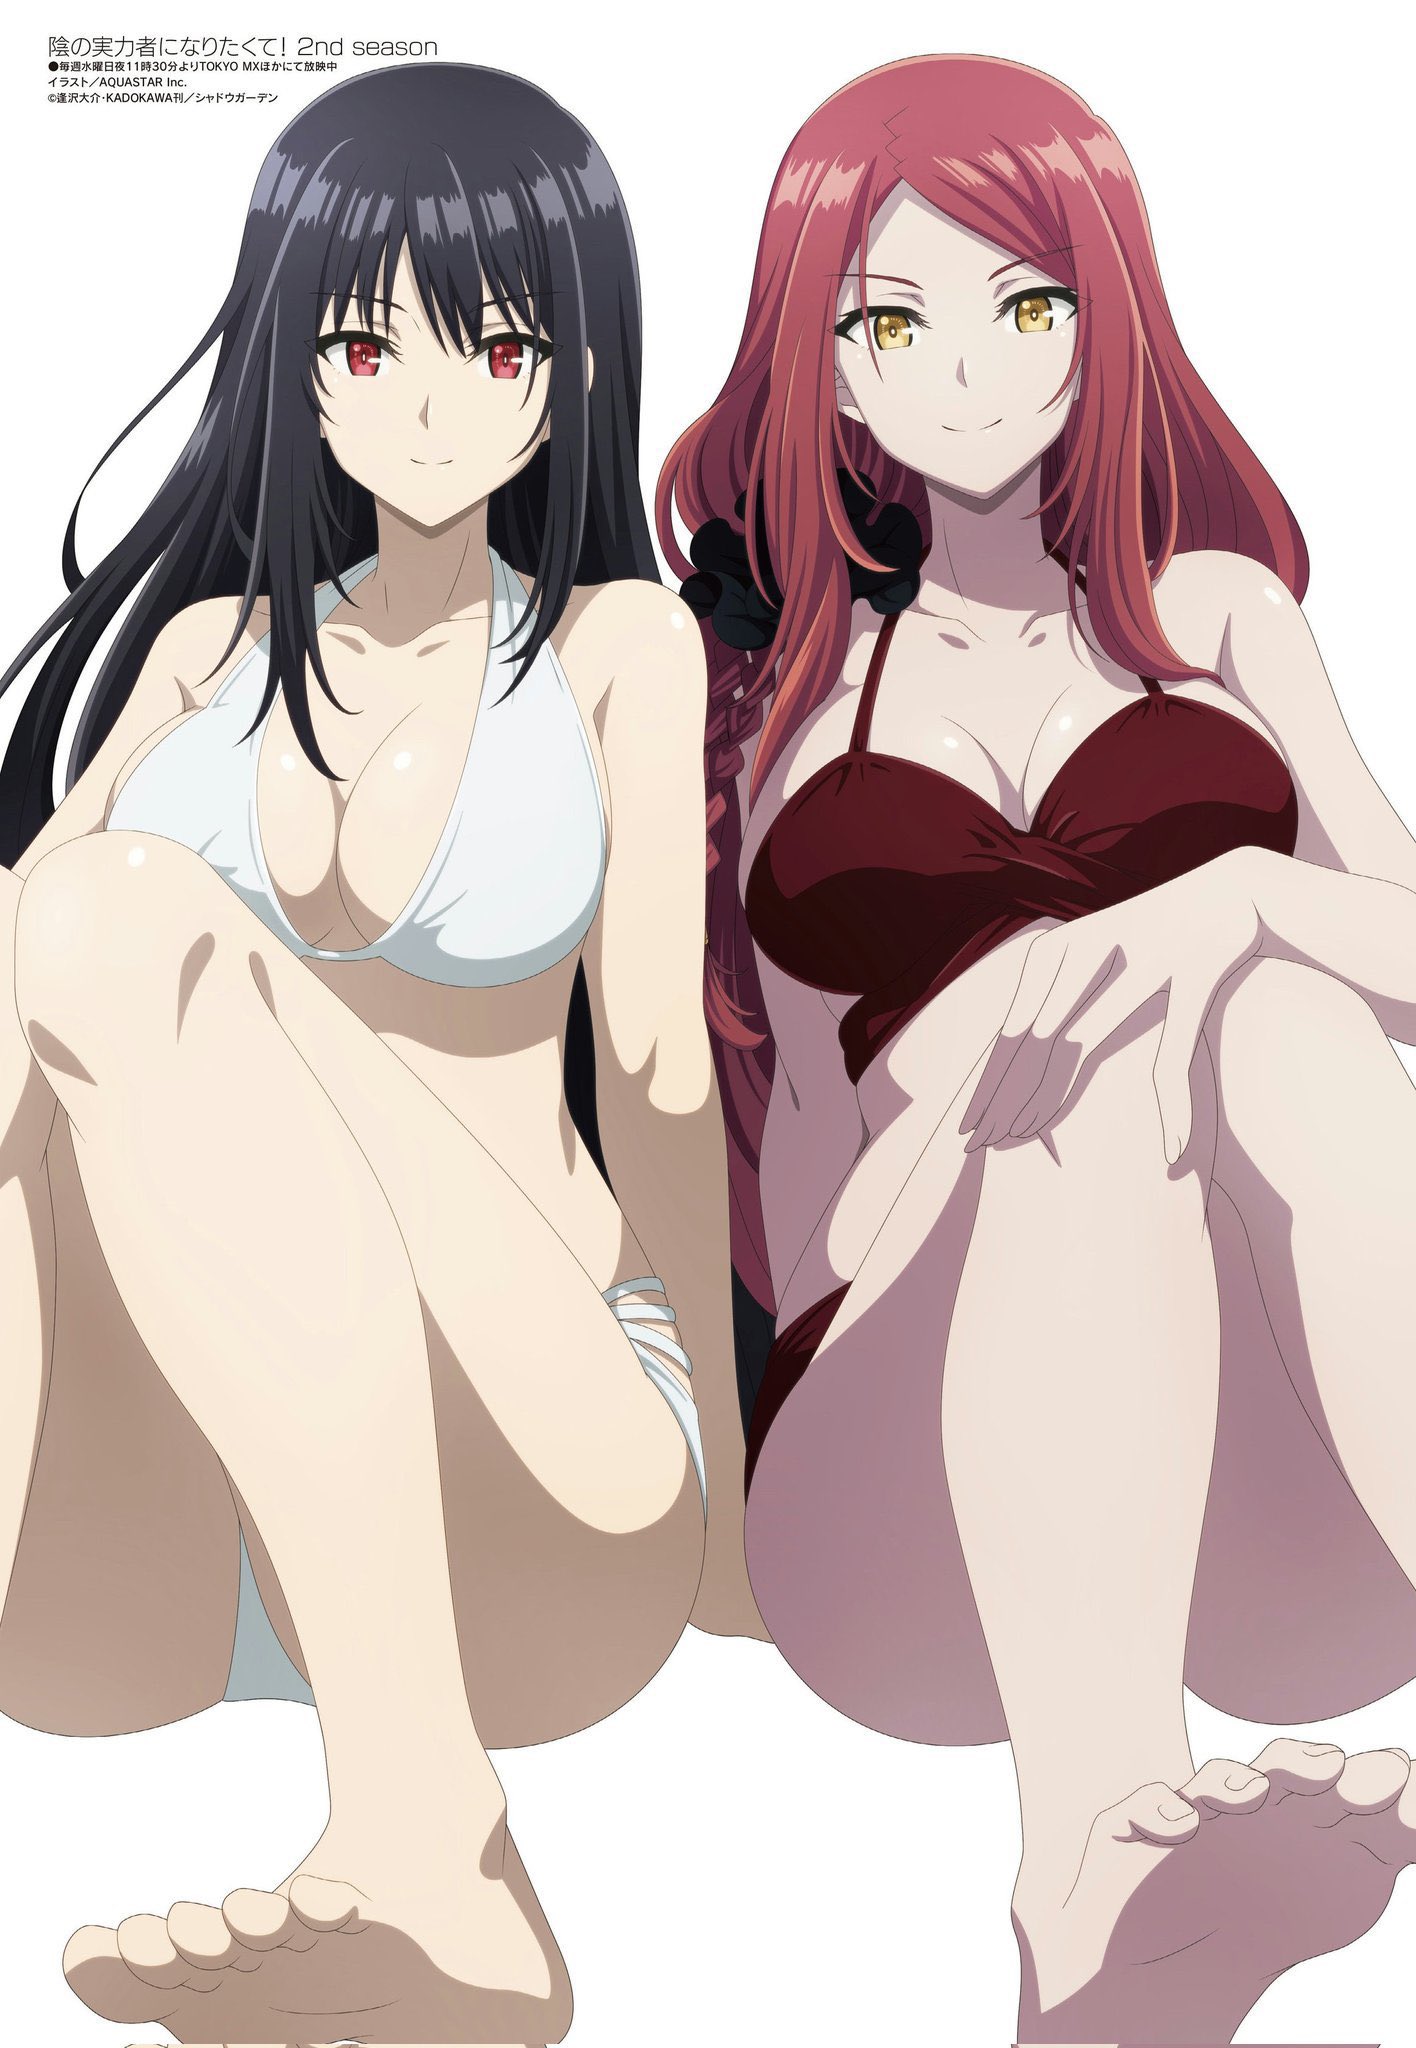 The Eminence in Shadow TV Anime Releases Seven Shadows' Swimsuit